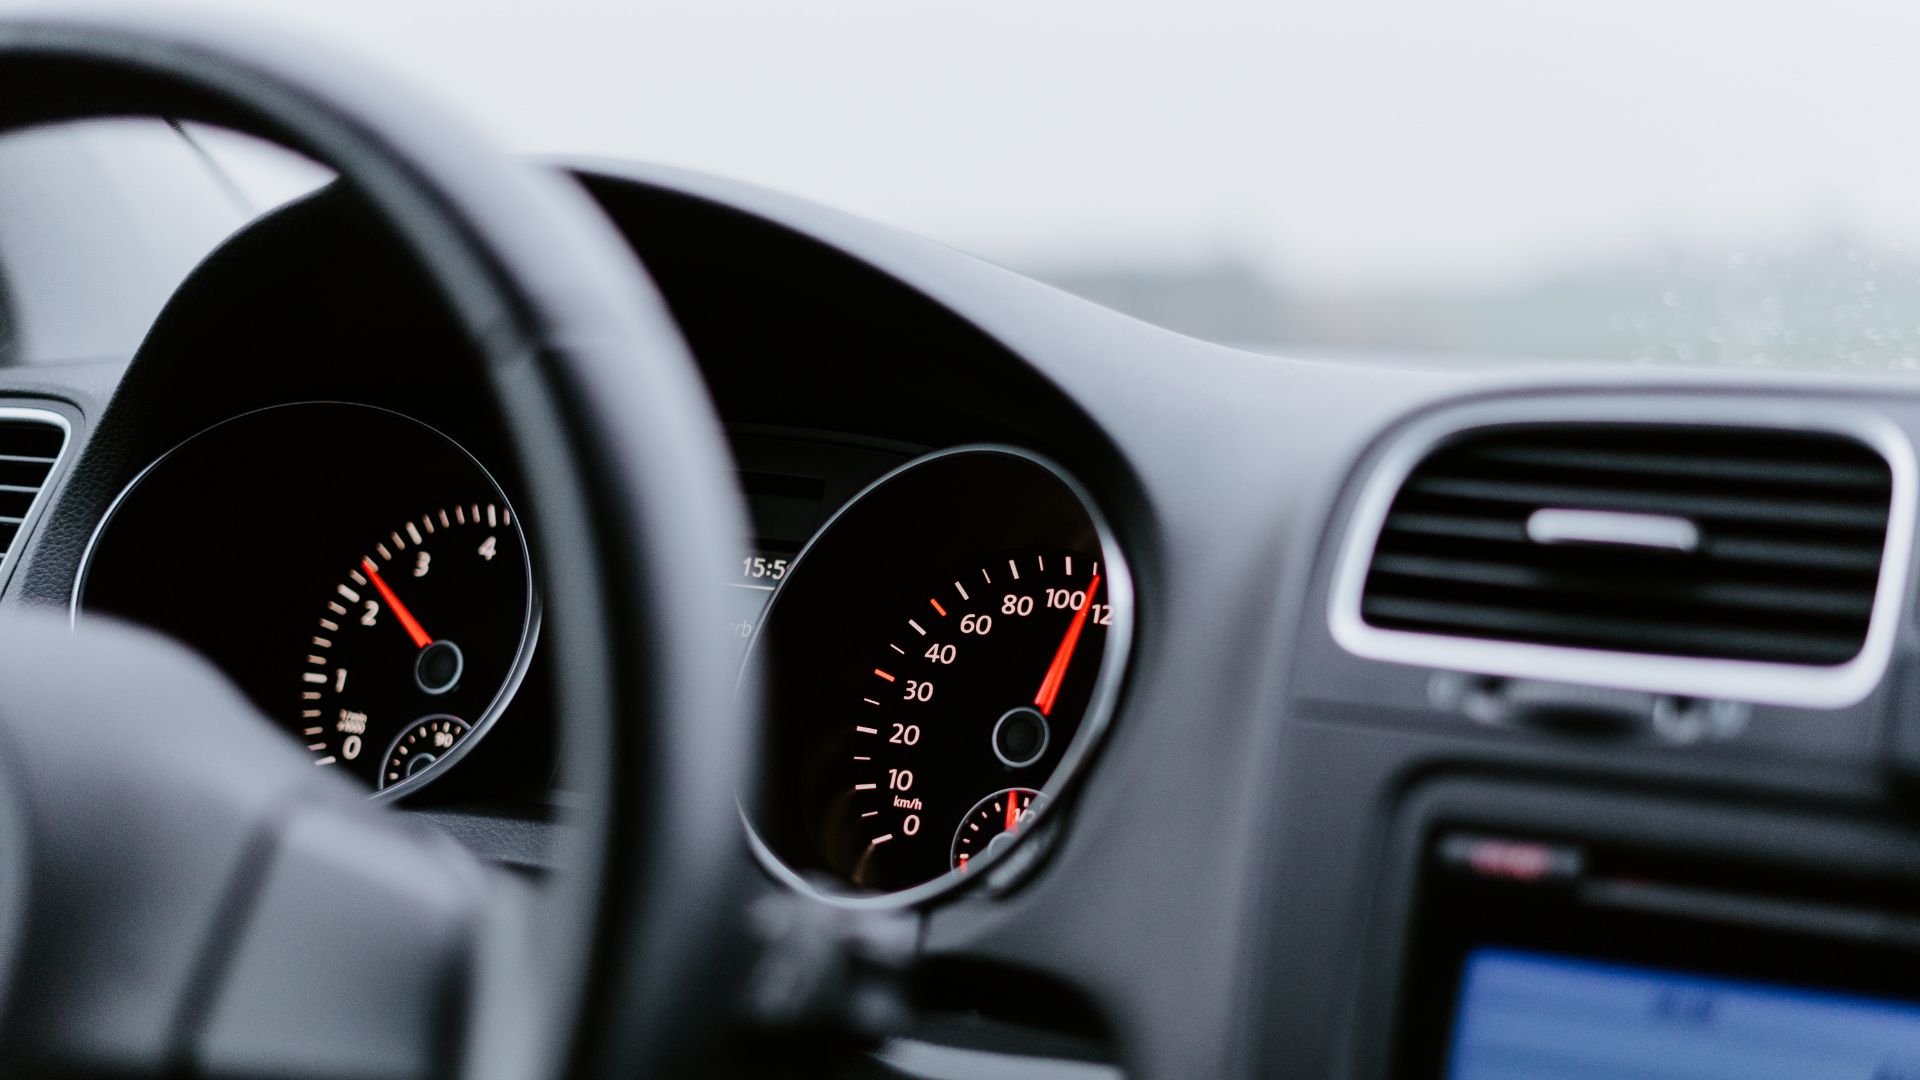 the dashboard of a car with a speedometer.